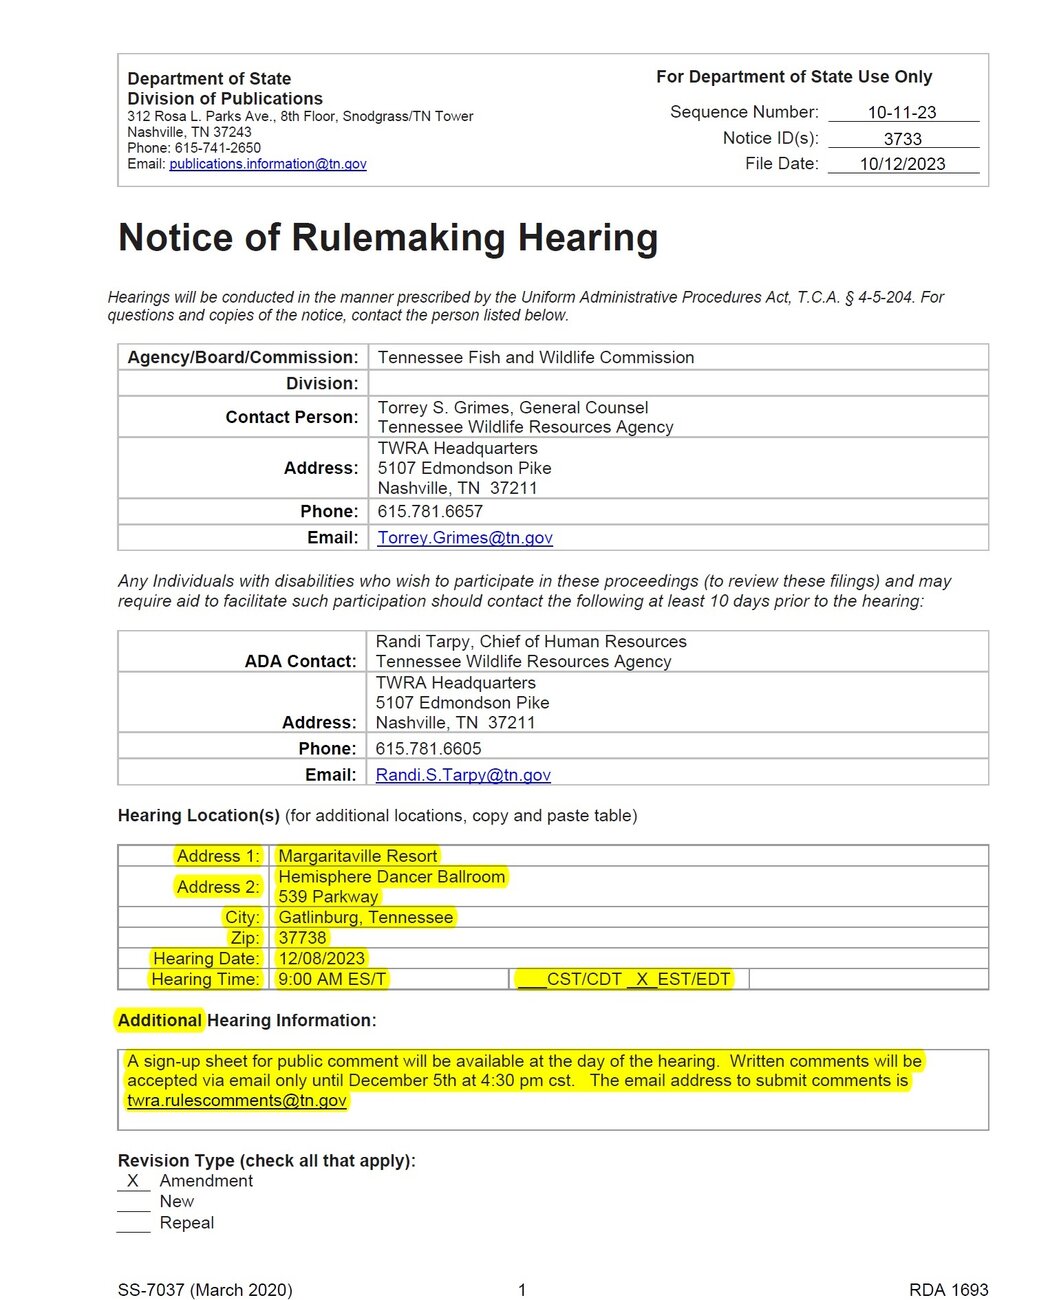 TWRA Public Notice of OHV hearing 12 08 2023